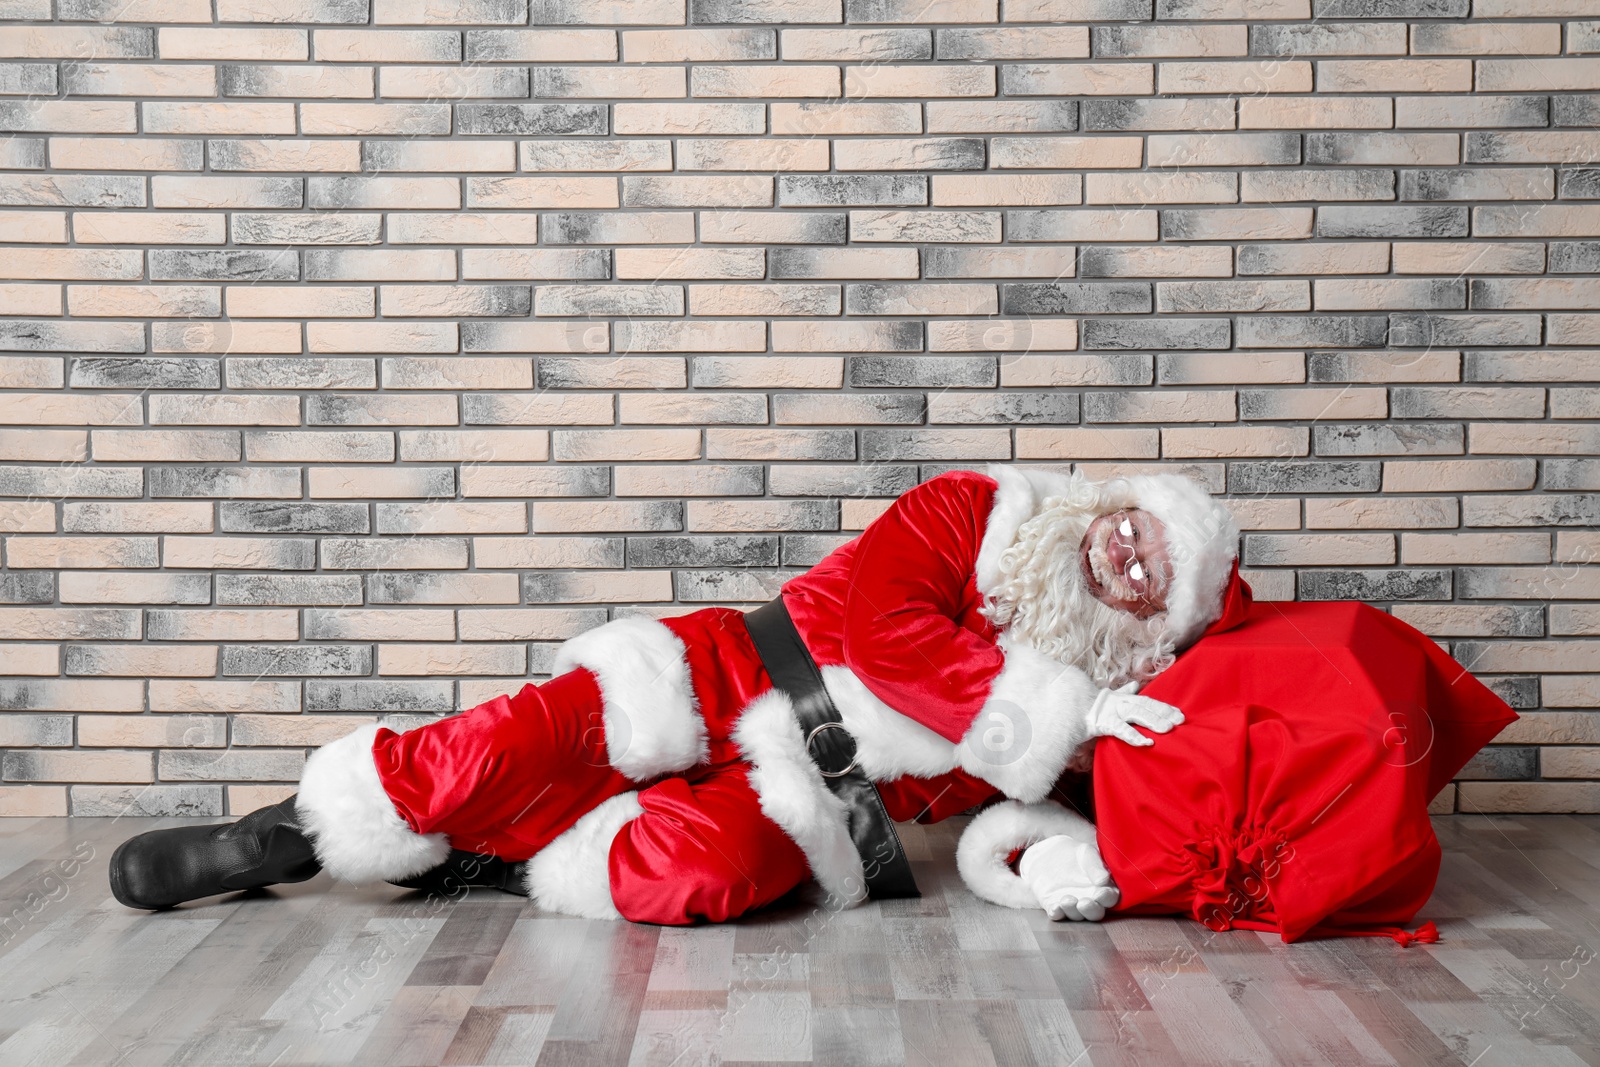 Photo of Authentic Santa Claus with big red bag full of gifts lying on floor near brick wall